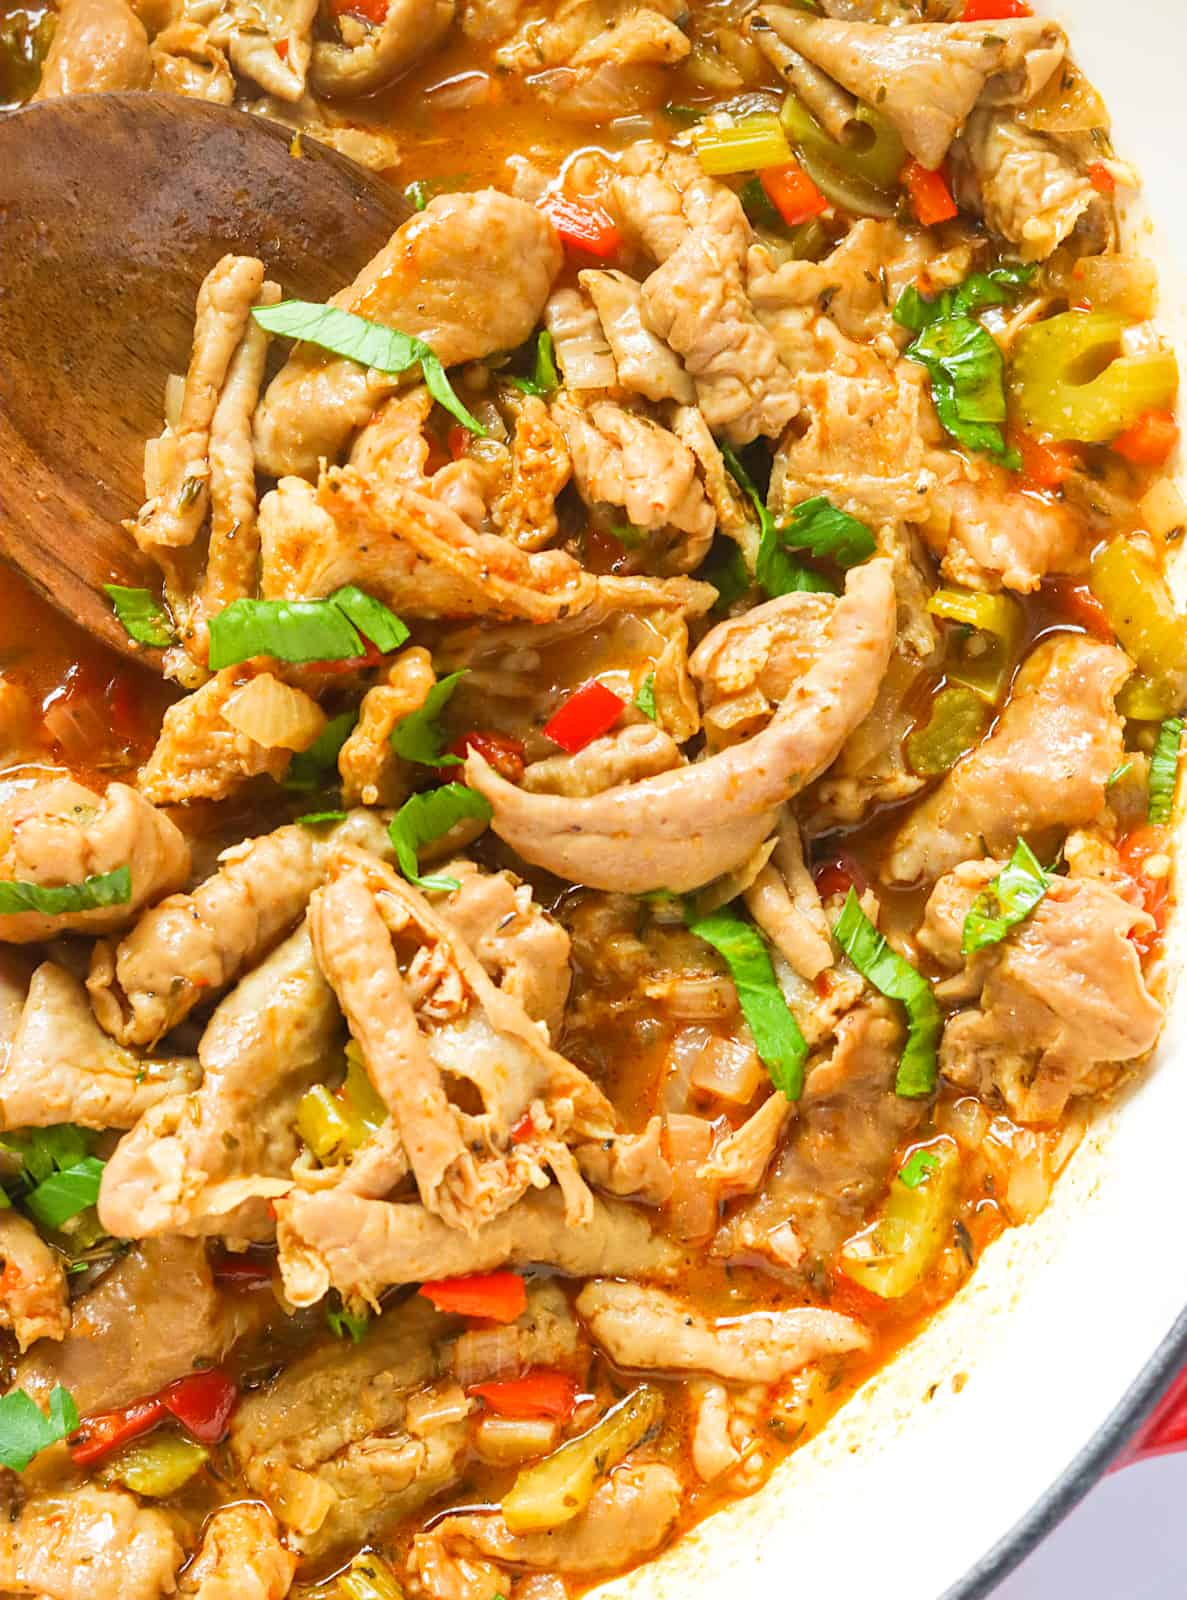 How to clean Pork Chitterlings ‼️ #foodporn #chitterlings #thanksgivin